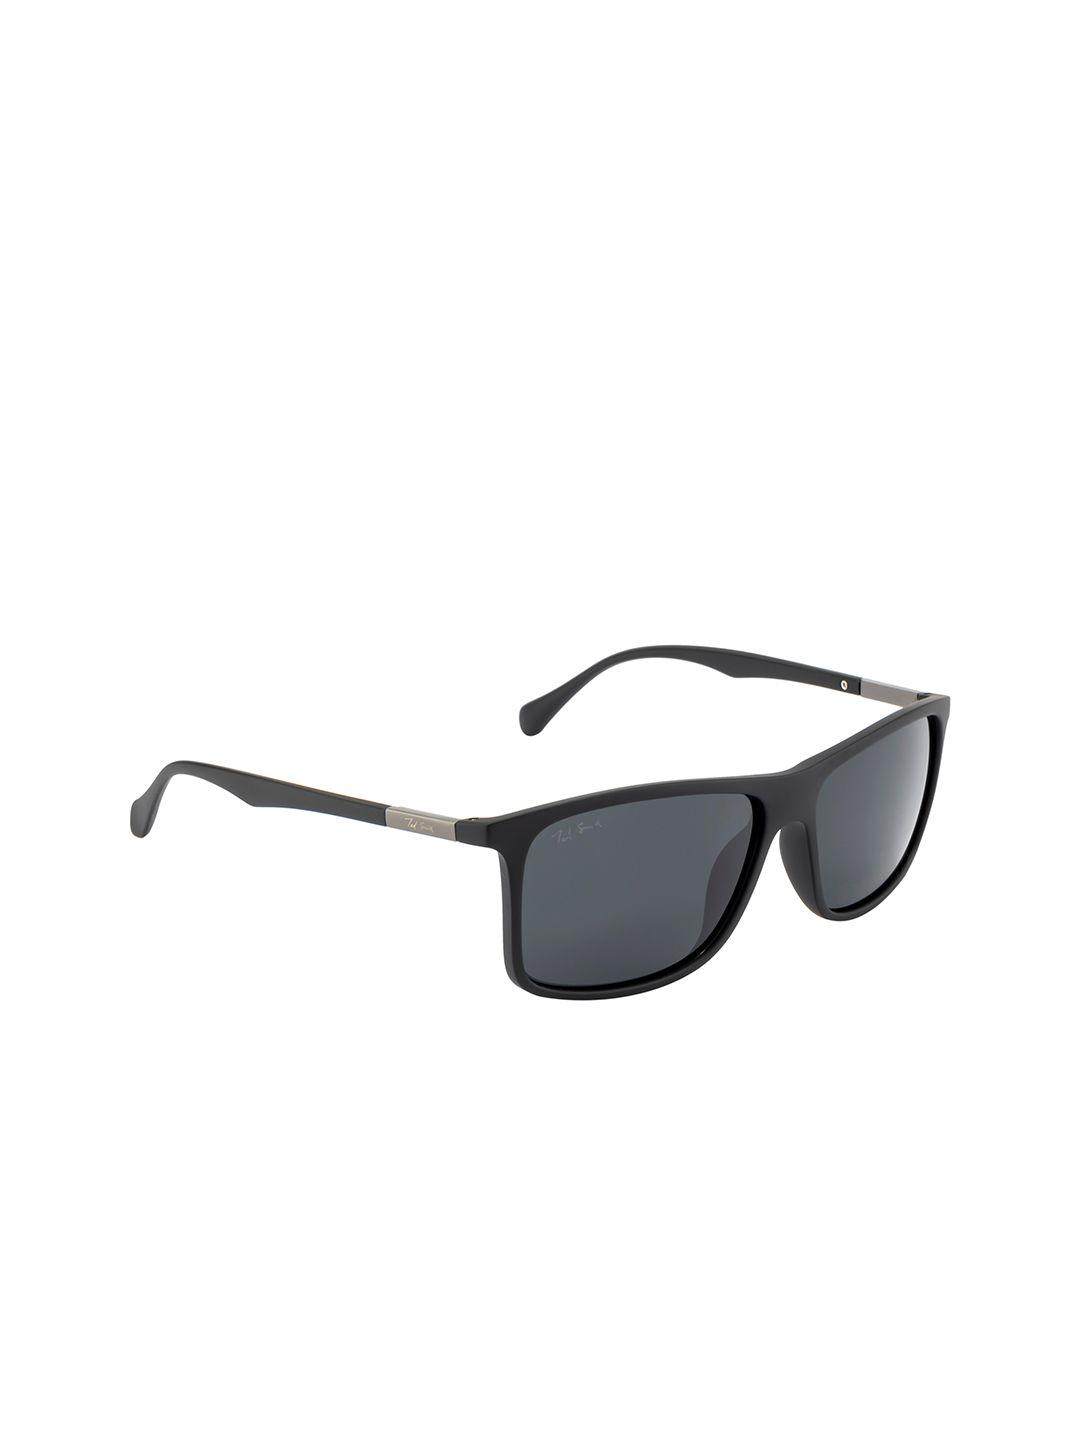 ted smith unisex grey lens & black rectangle sunglasses with polarised lens